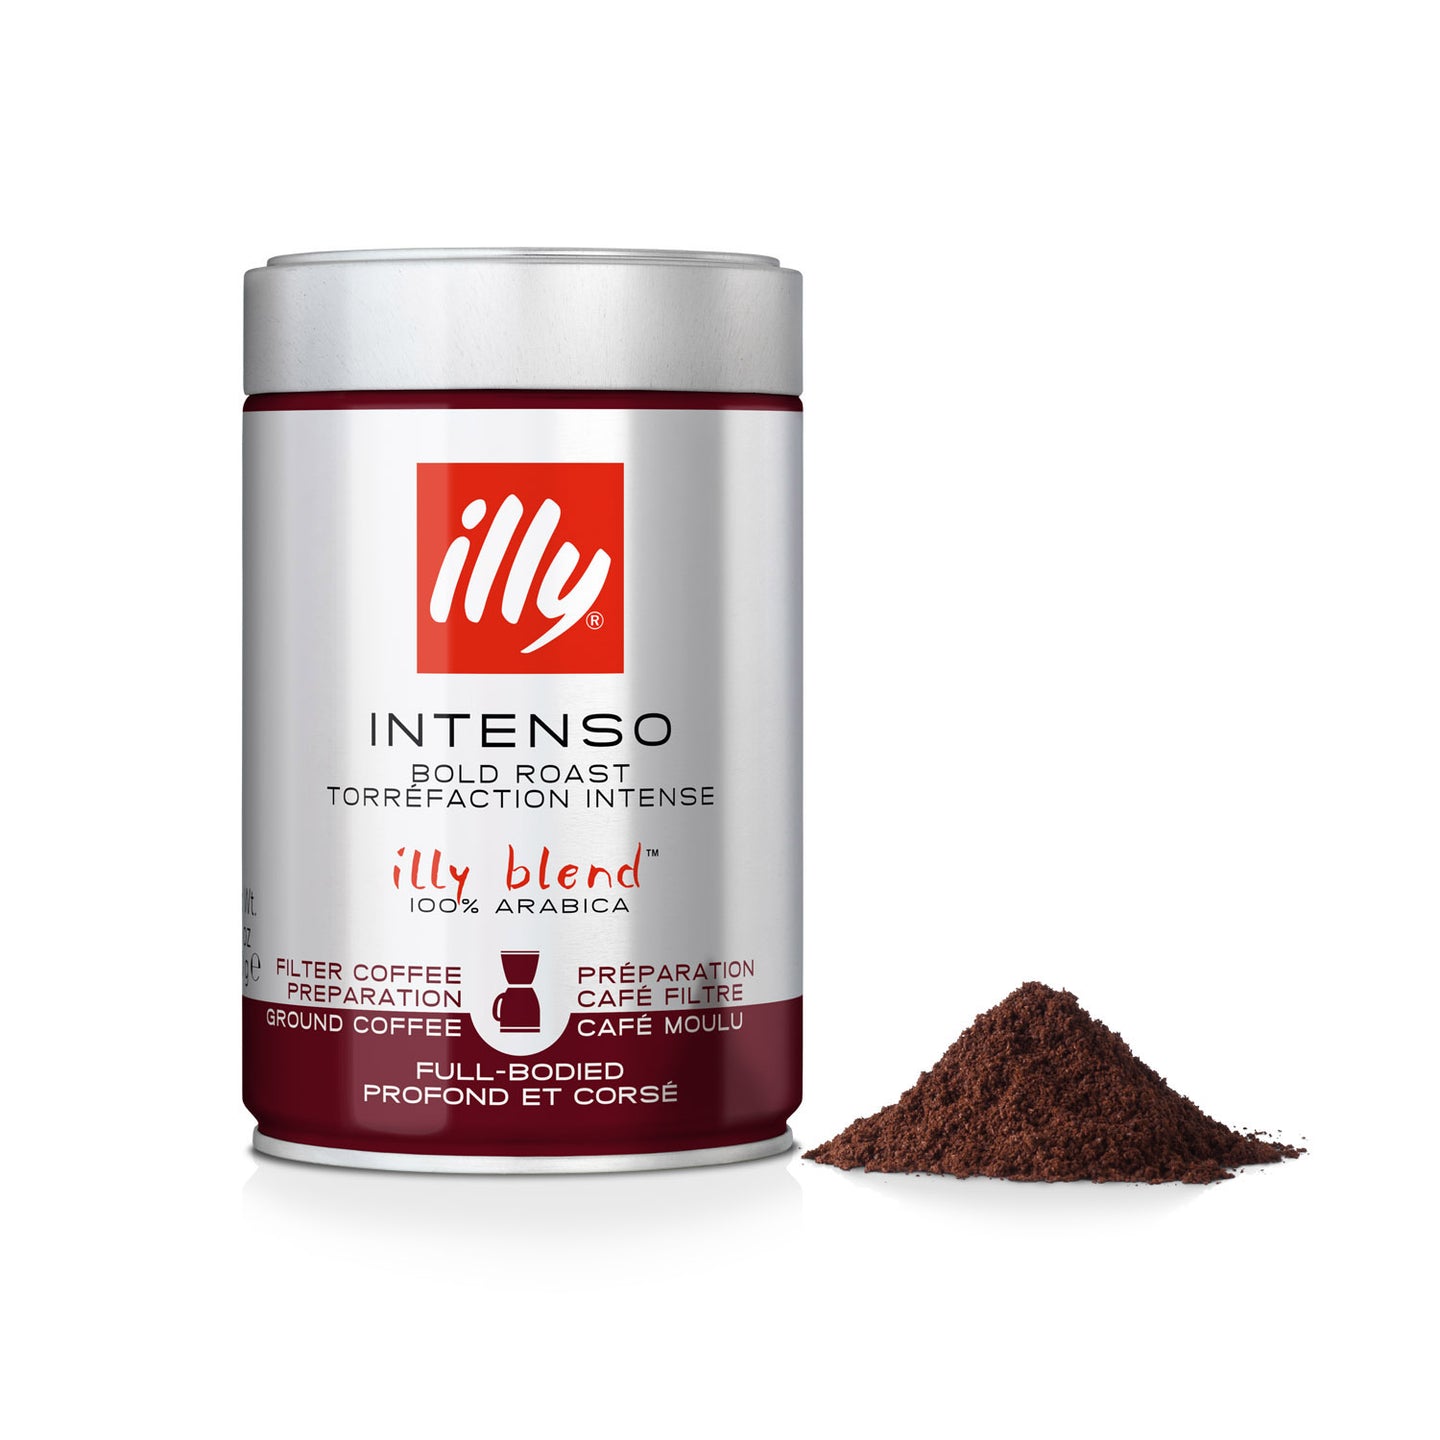 Illy Intenso Bold Roast filter coffee